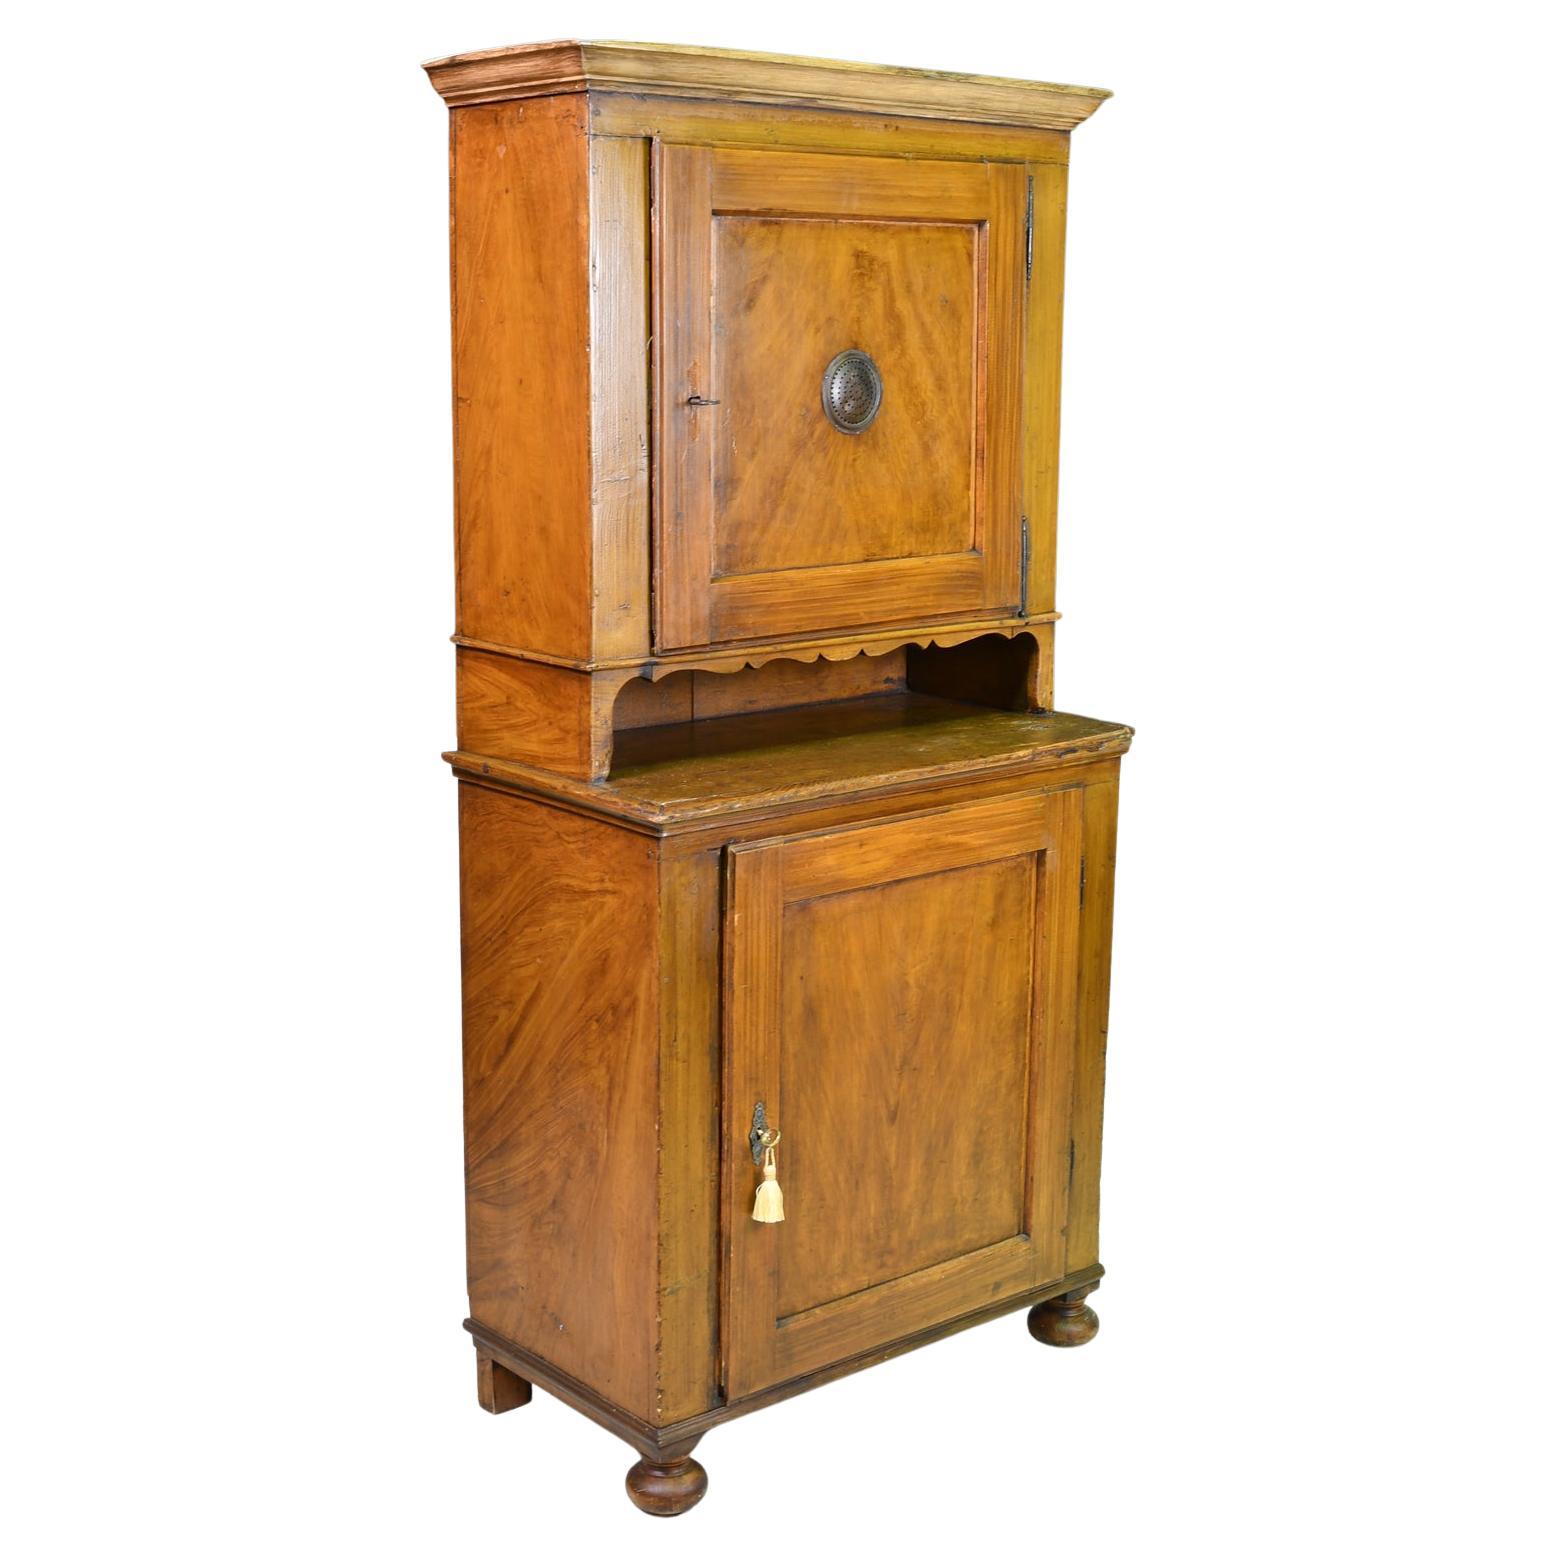 A charming country cupboard with the original faux-bois, tooled & grained painted finish. Underlying wood is pine but this wonderful cabinet was spared being stripped and waxed in the 90's. Lap joint and mortise and tenon construction with wooden